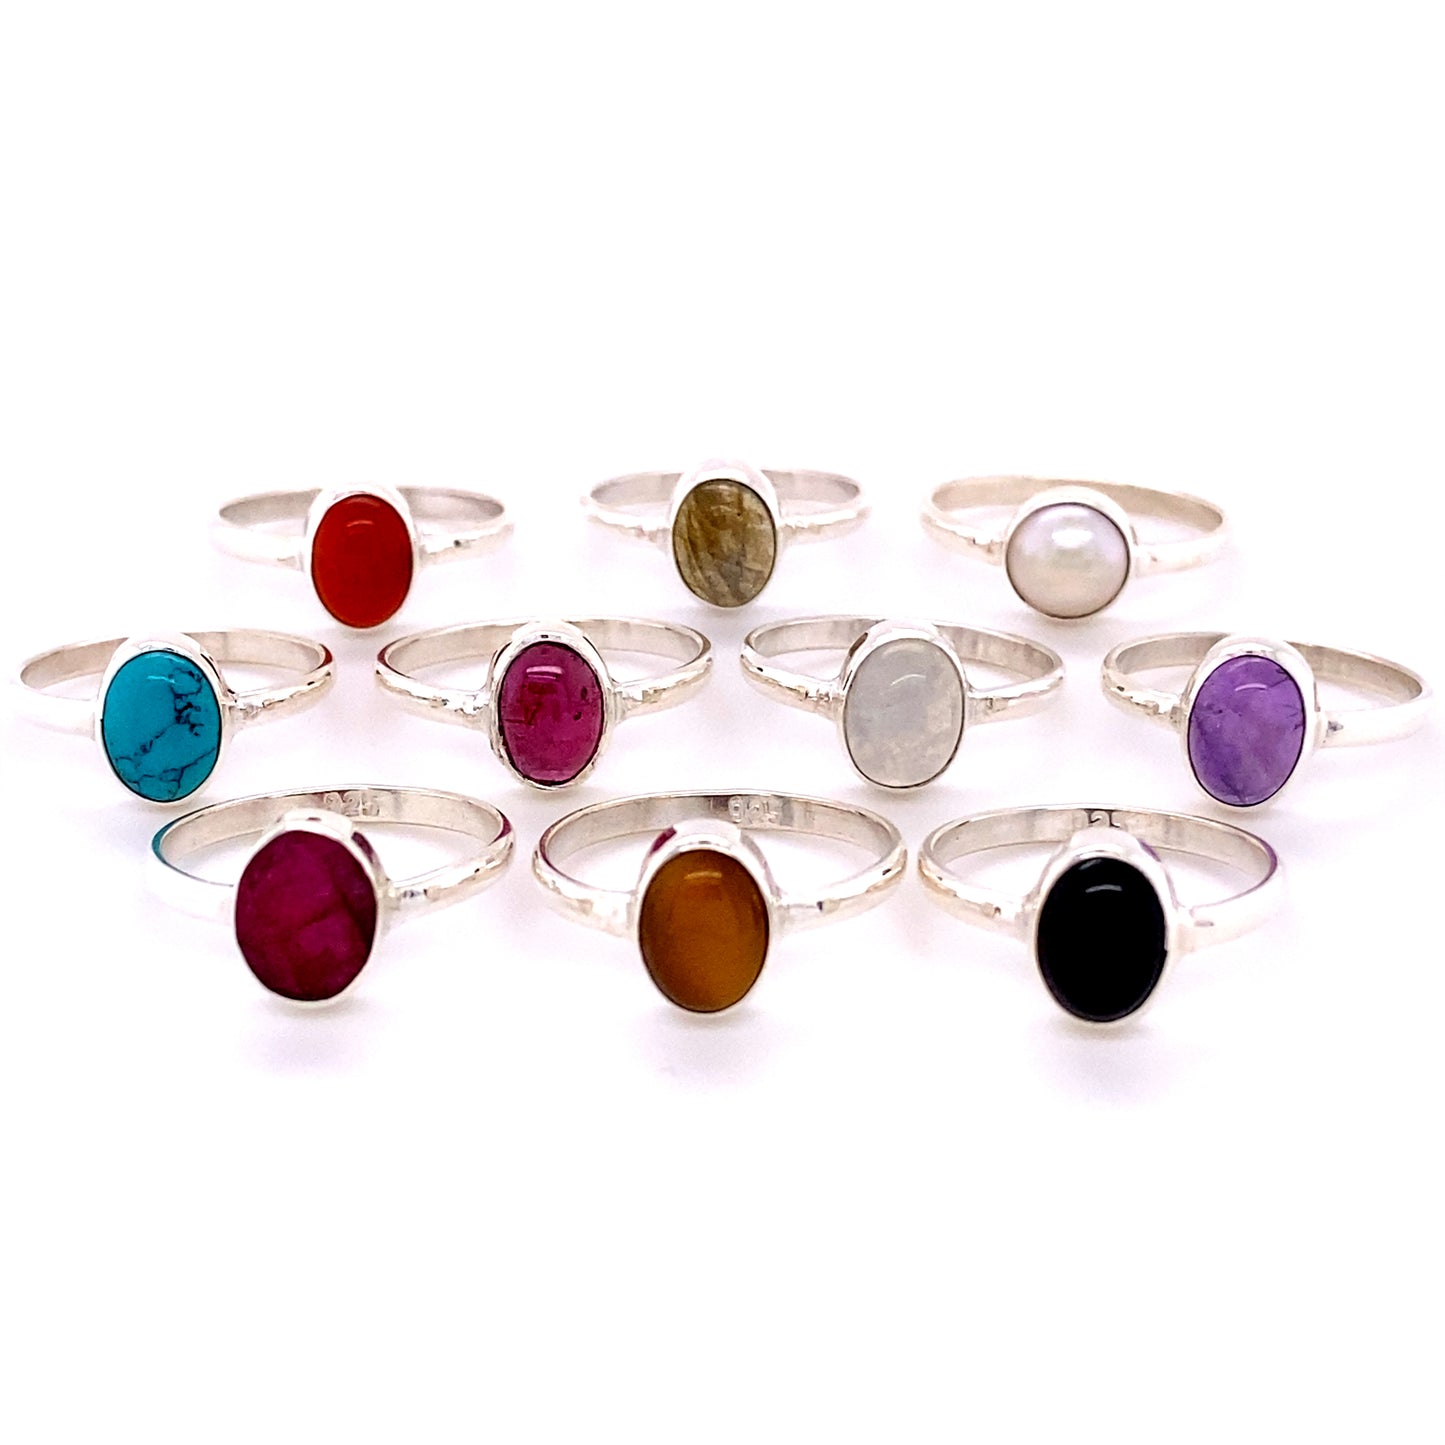 A set of Simple Oval Natural Gemstone Rings with different colored stones.